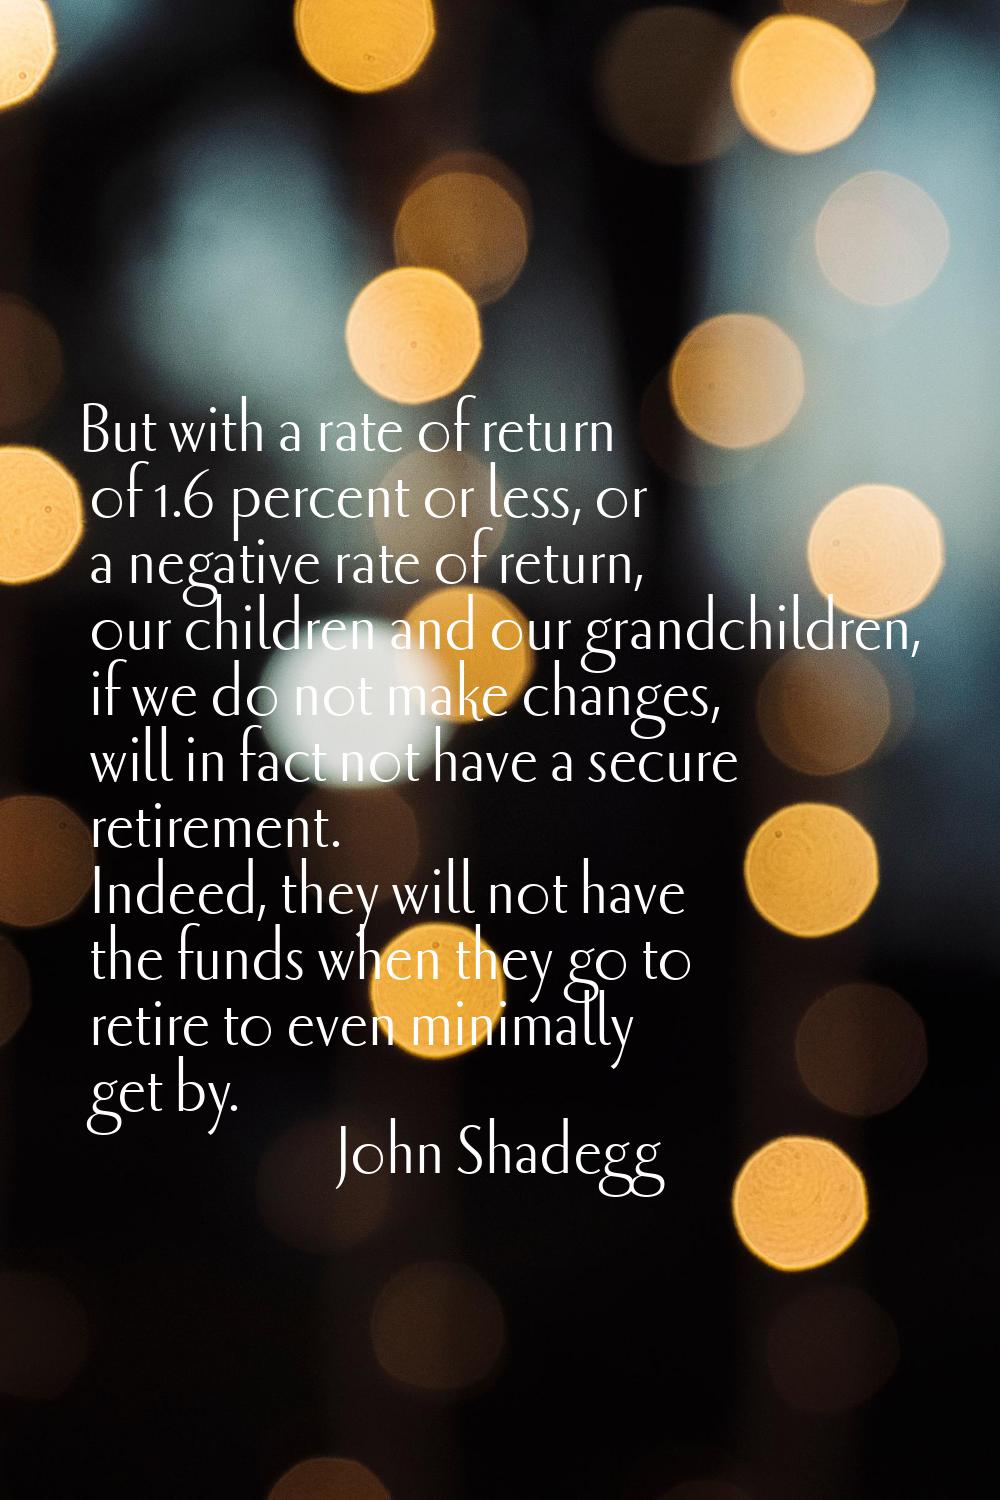 But with a rate of return of 1.6 percent or less, or a negative rate of return, our children and ou